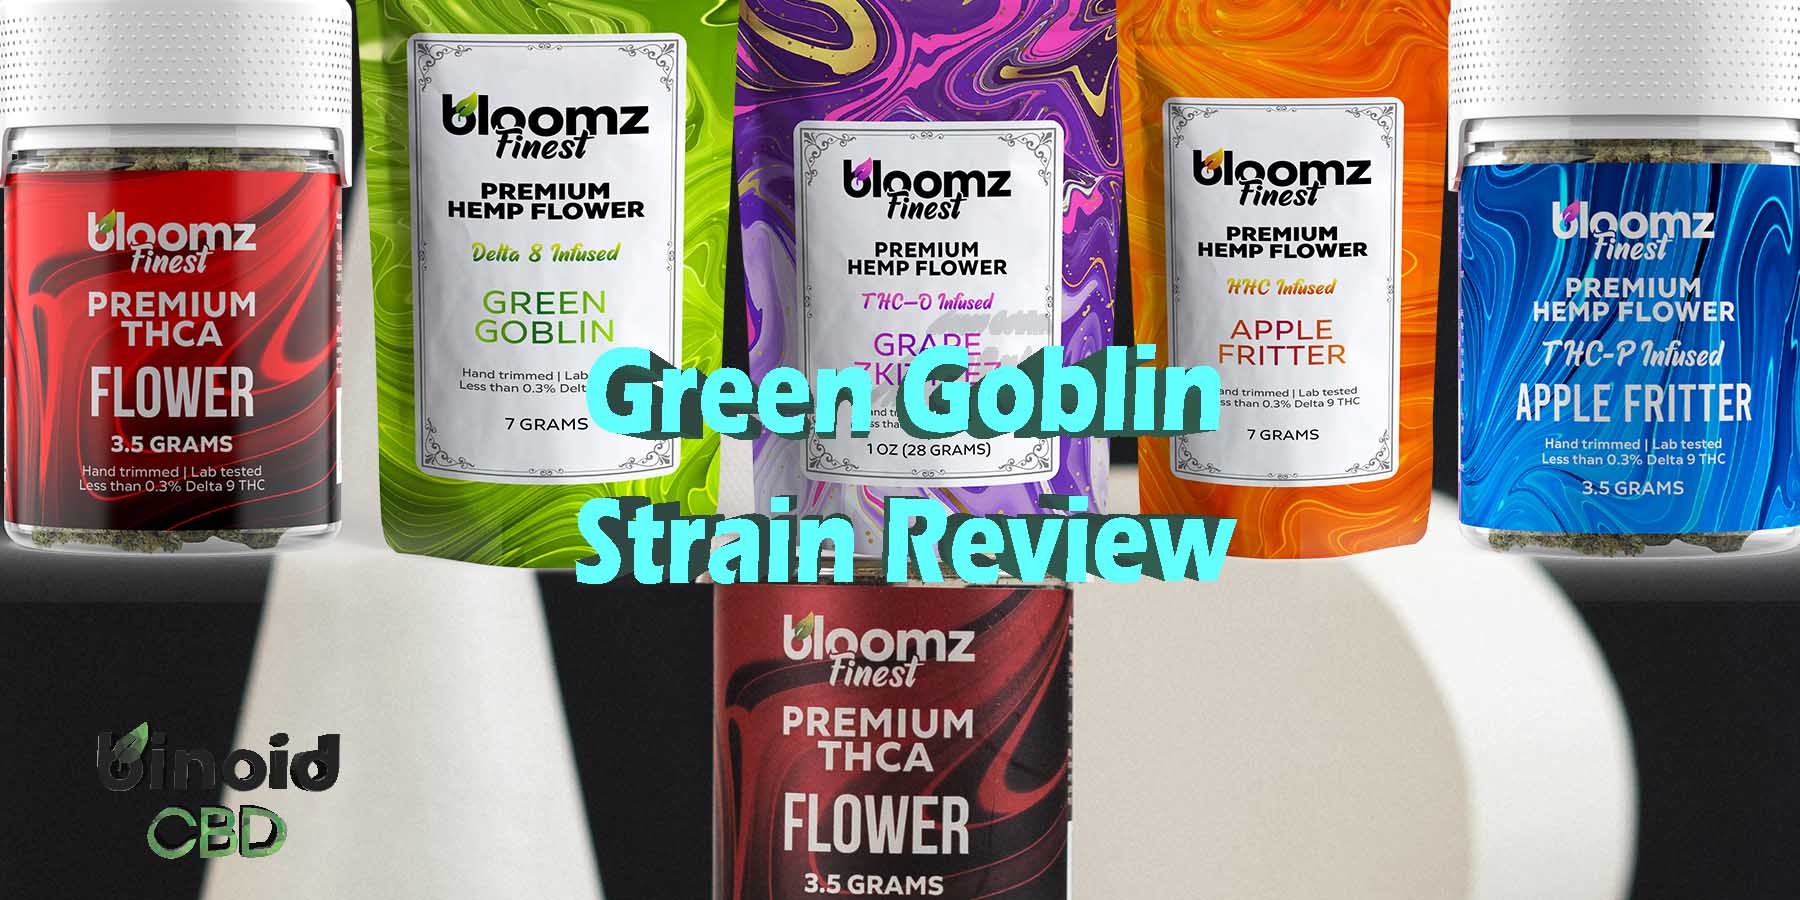 Green Goblin Strain How To Buy Delta 8 Flower Online Pre Rolls Where To Get Near Me Best Place Lowest Price Coupon Discount Strongest Brand Bloomz